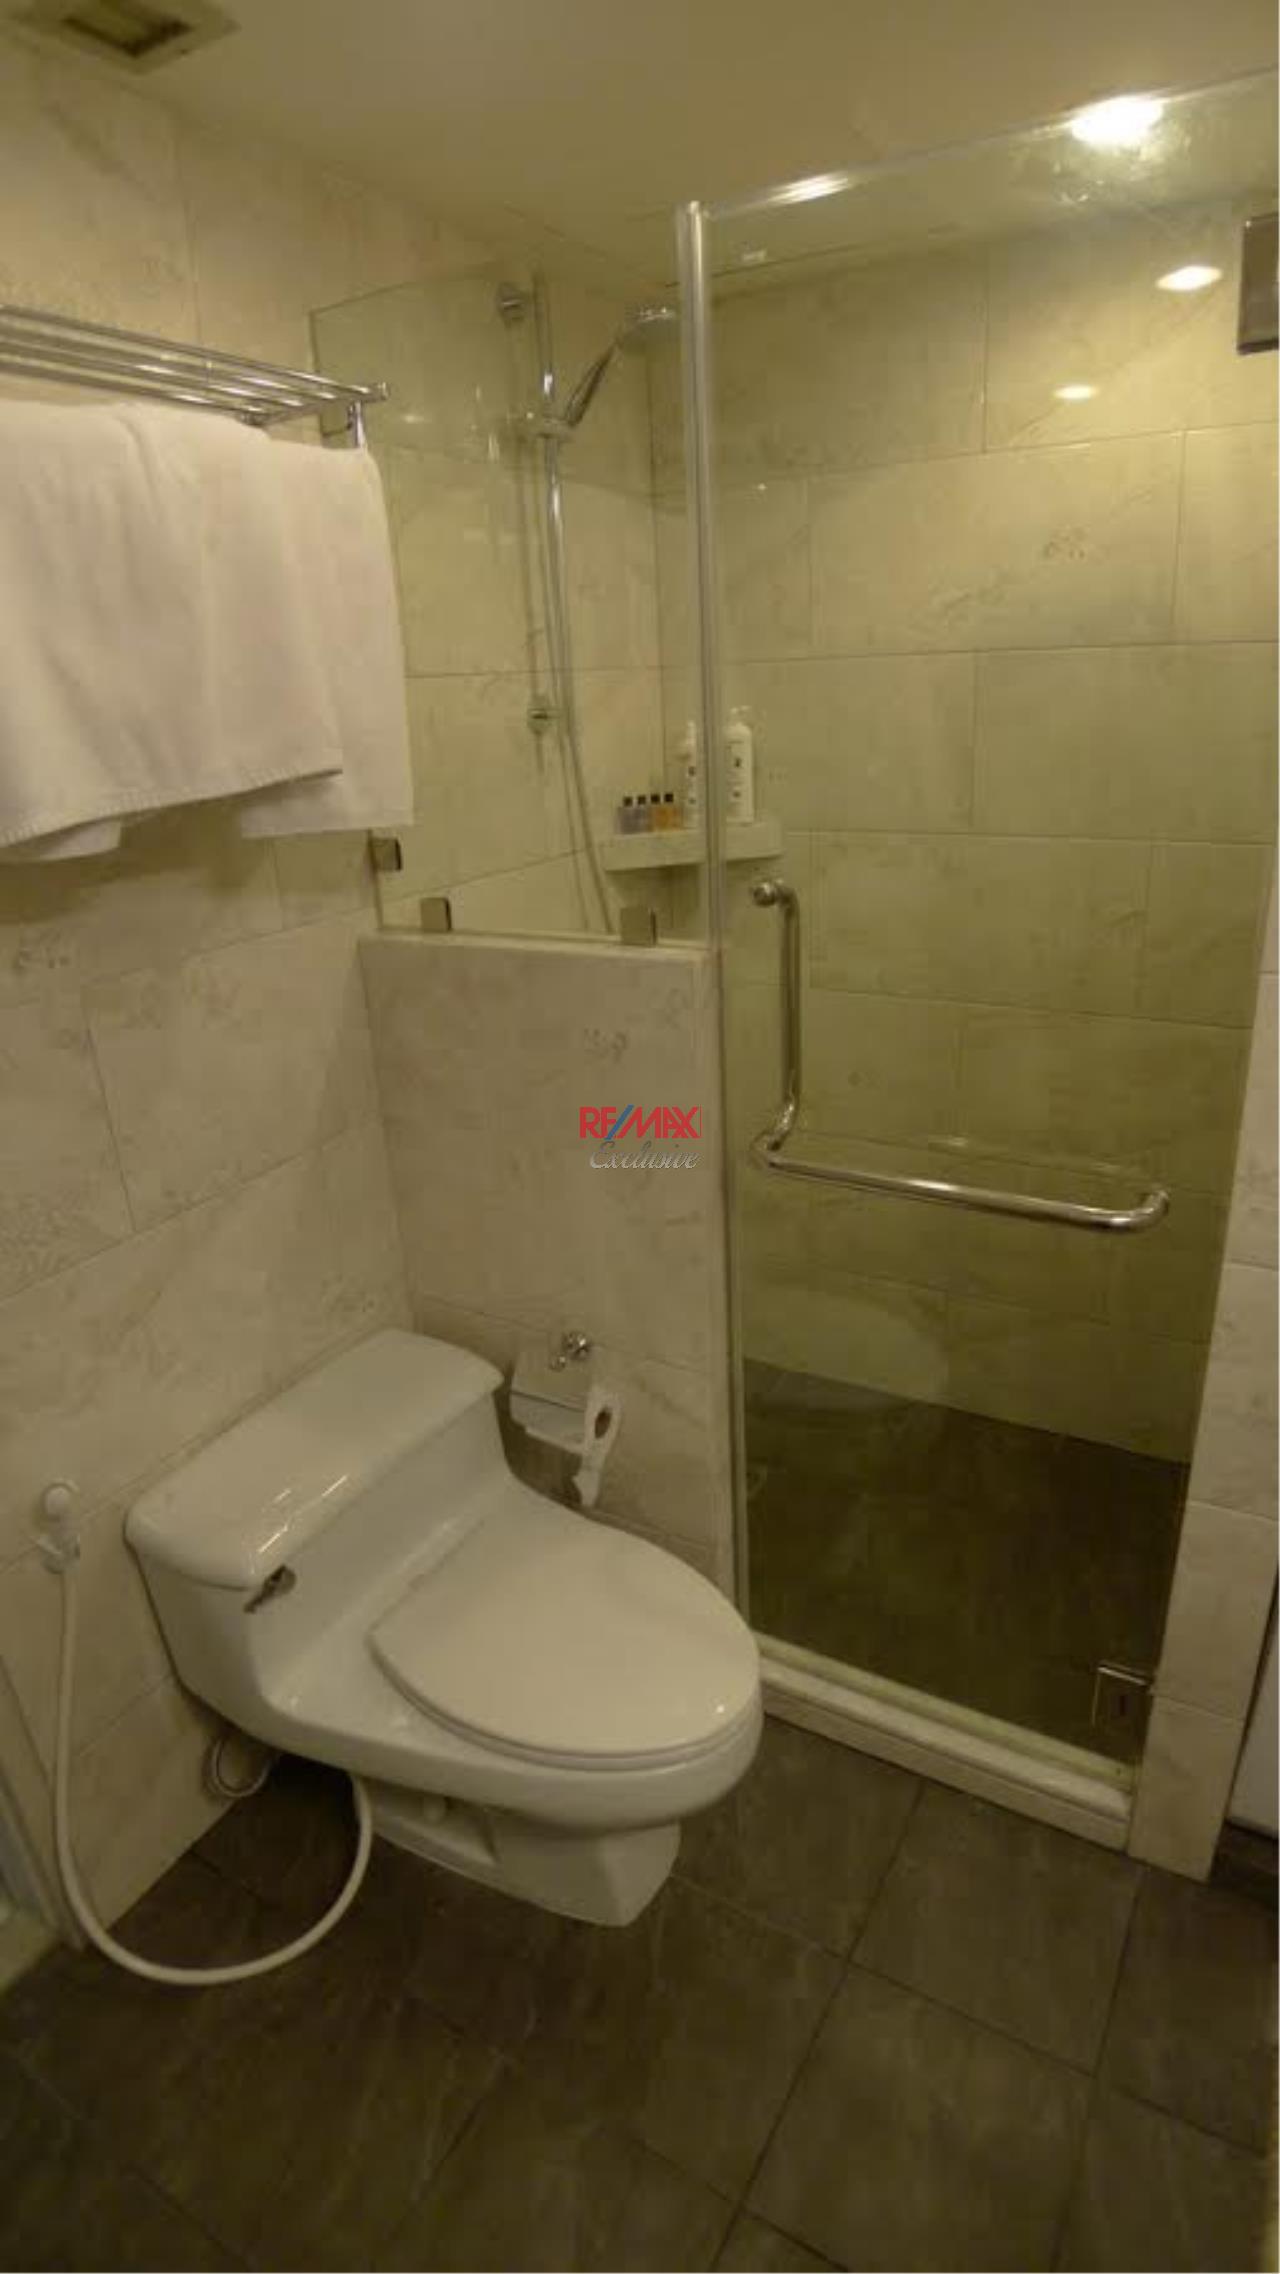 RE/MAX Exclusive Agency's Newly Renovated Omni Tower 2 bedroom for sale 5500000 Good Price 29